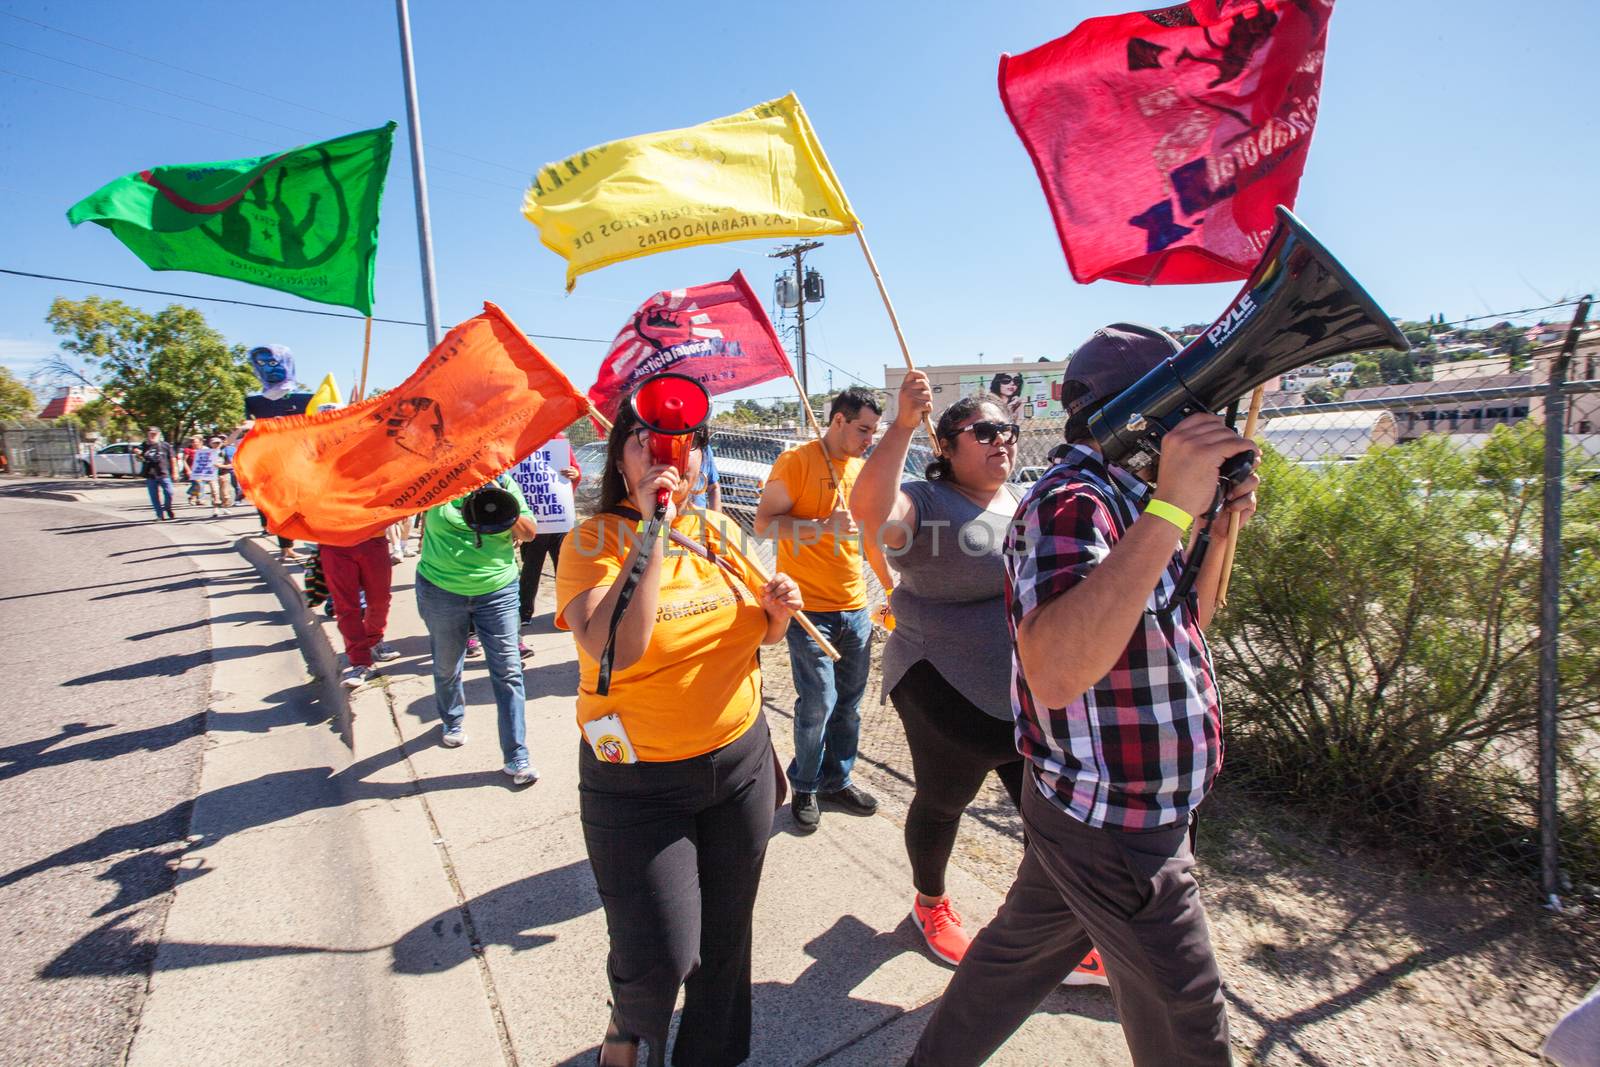 Marchers with colorful flags at border protest by Creatista